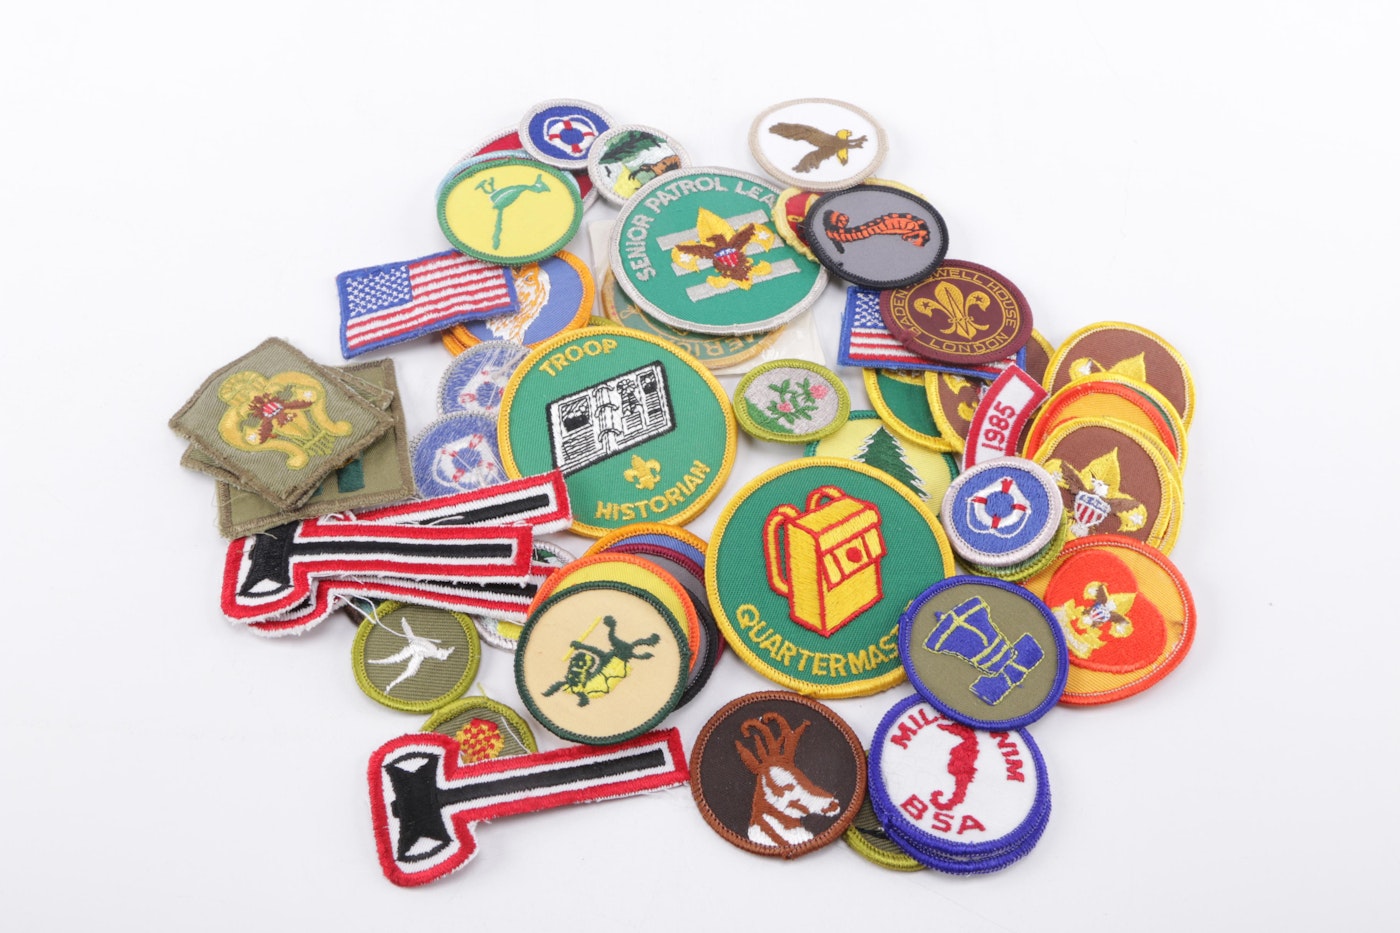 1960s-2000s Boy Scout Patches and Stickers | EBTH